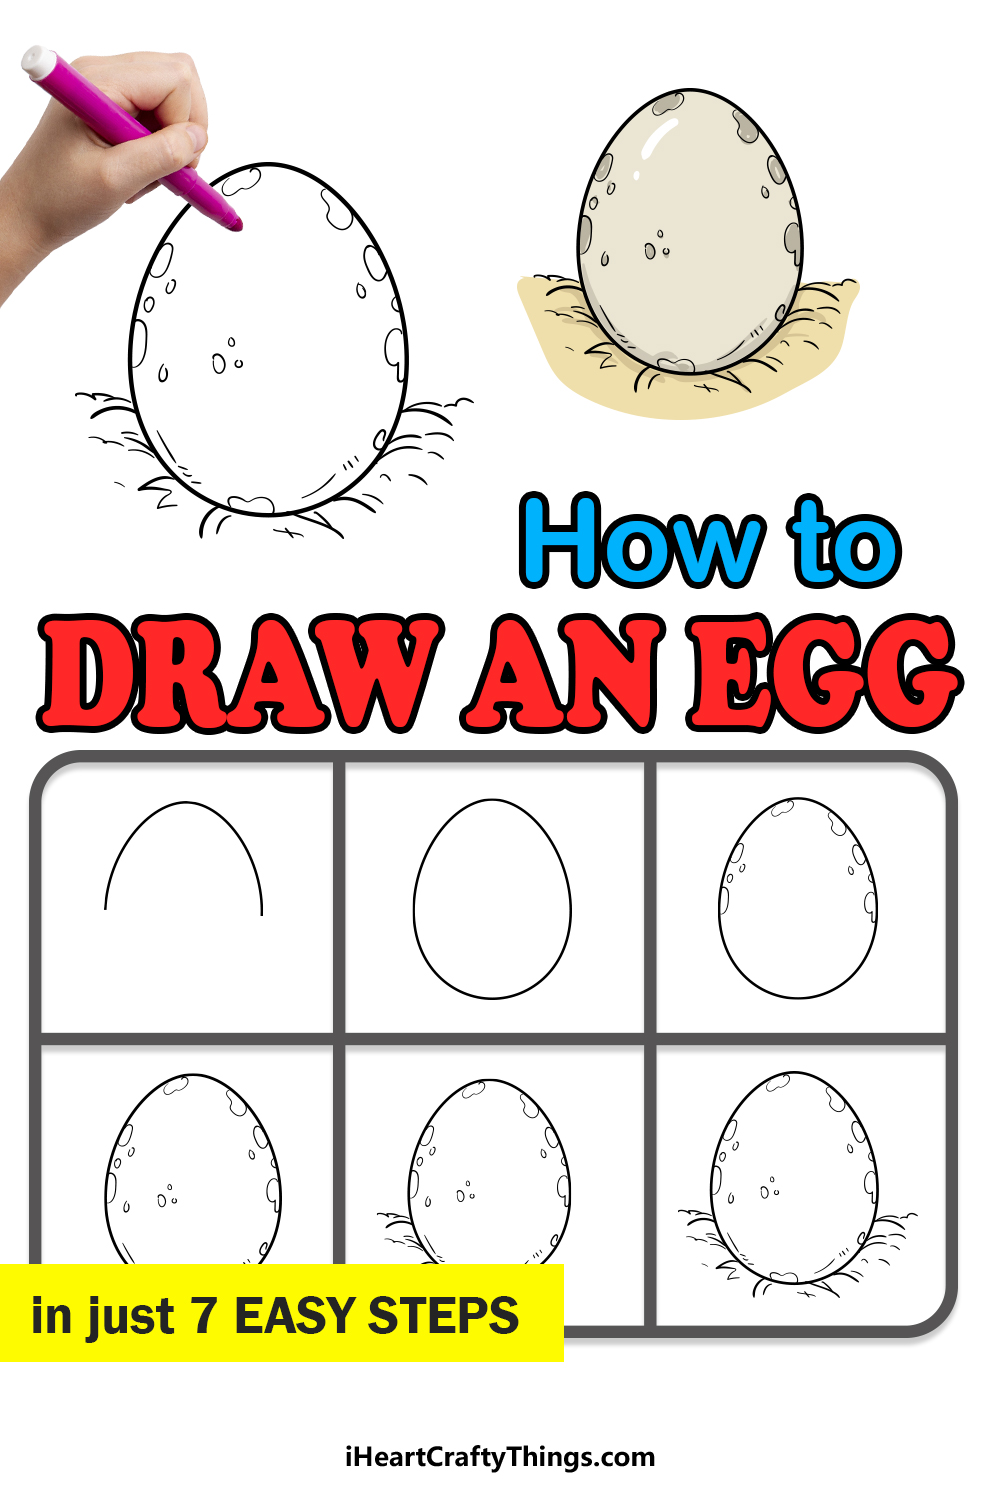 how to draw an egg in 7 easy steps